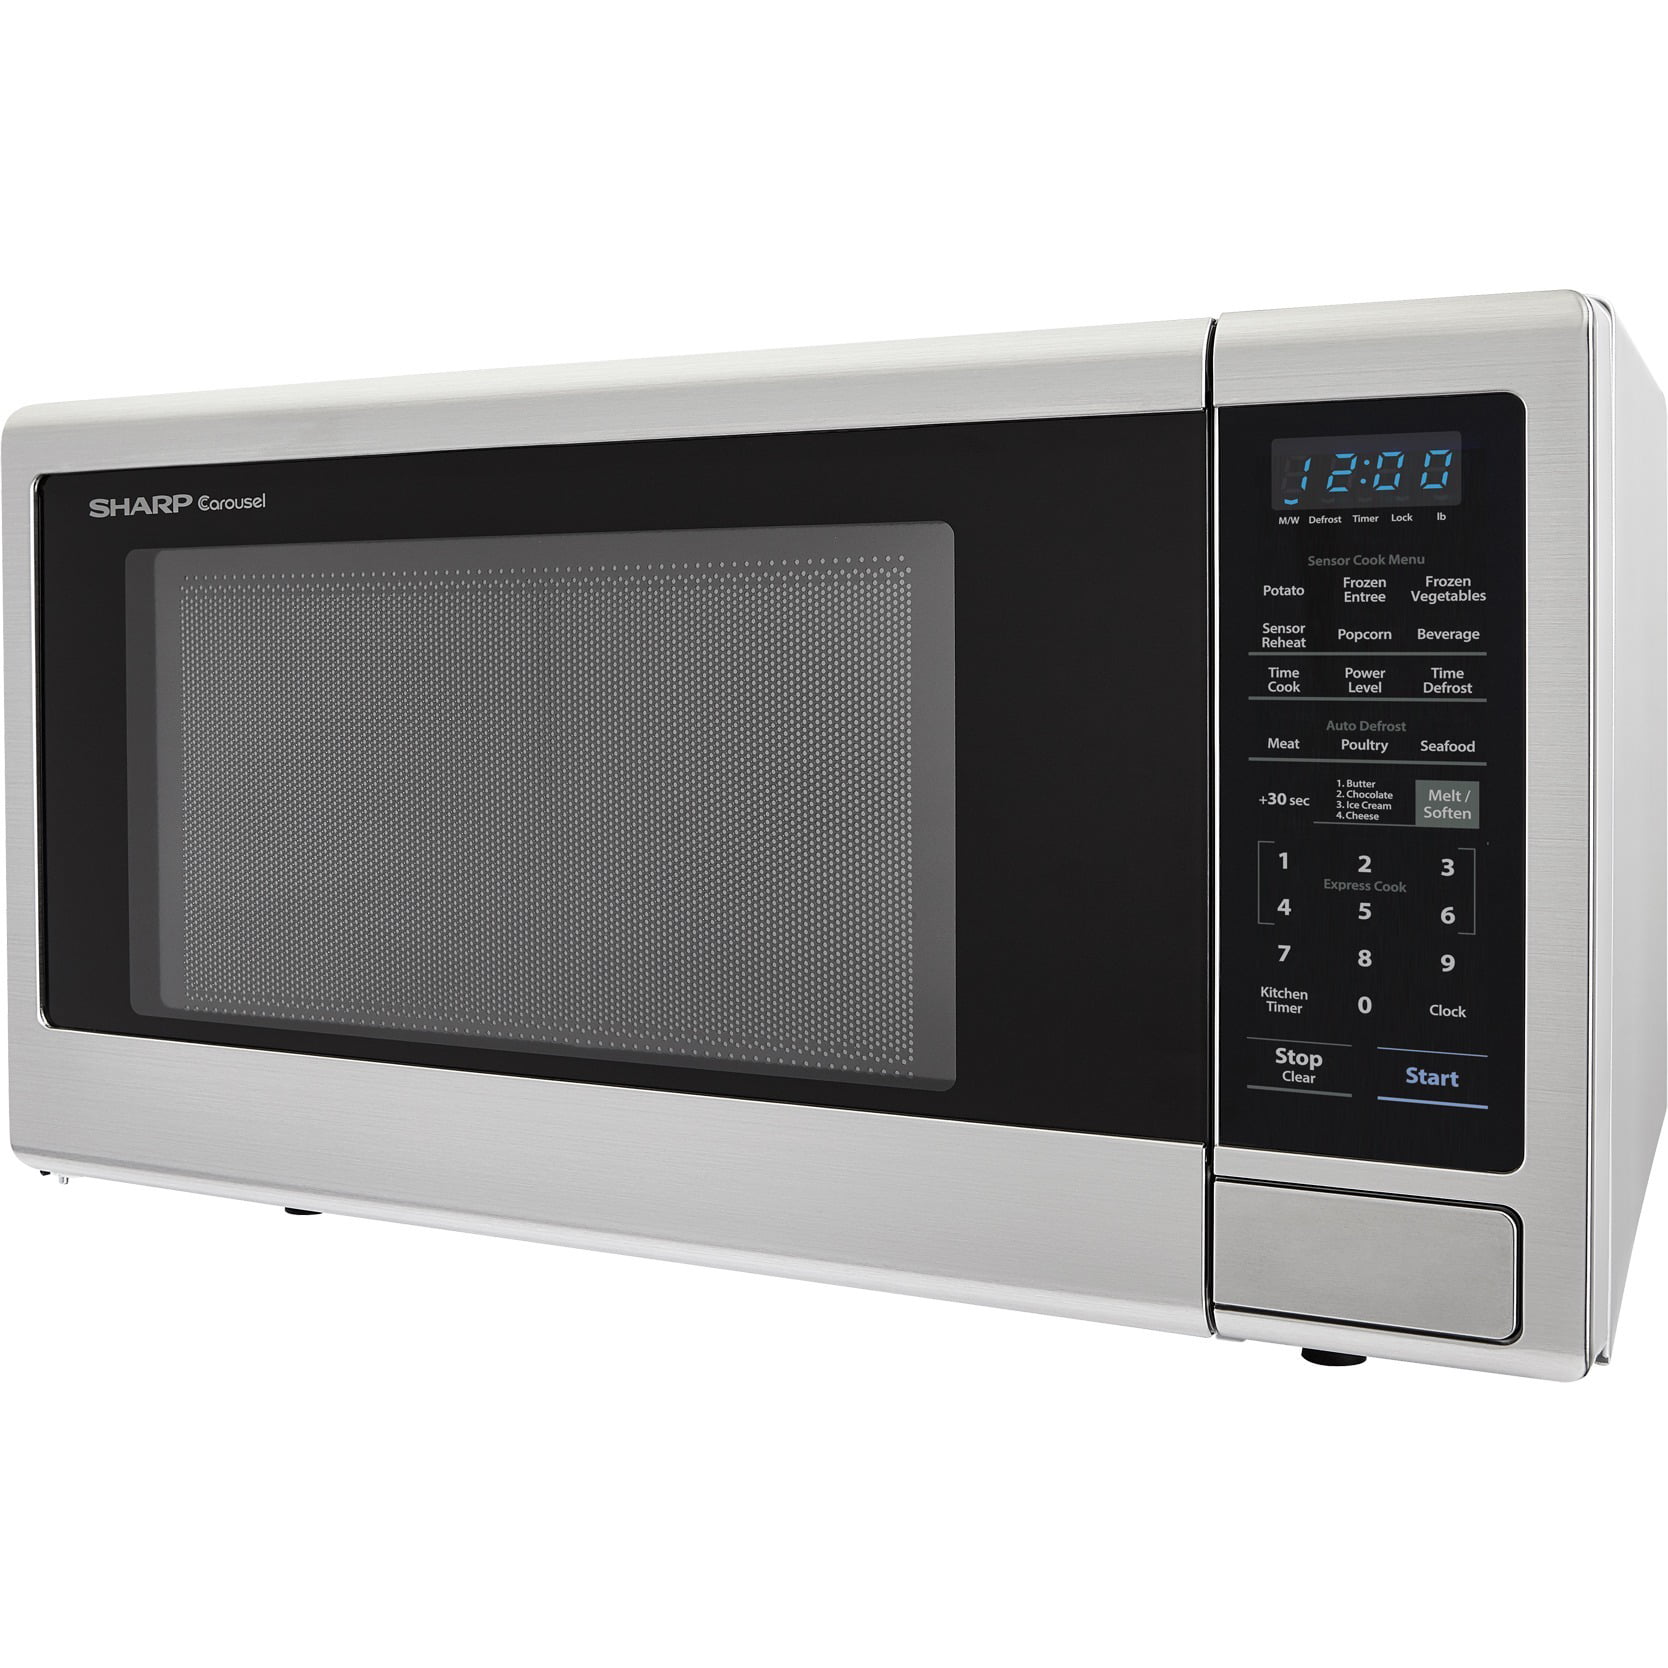 2.2 Cu. Ft. 1200W Stainless Steel Countertop Microwave Oven (SMC2242DS Stainless Steel Microwaves At Walmart